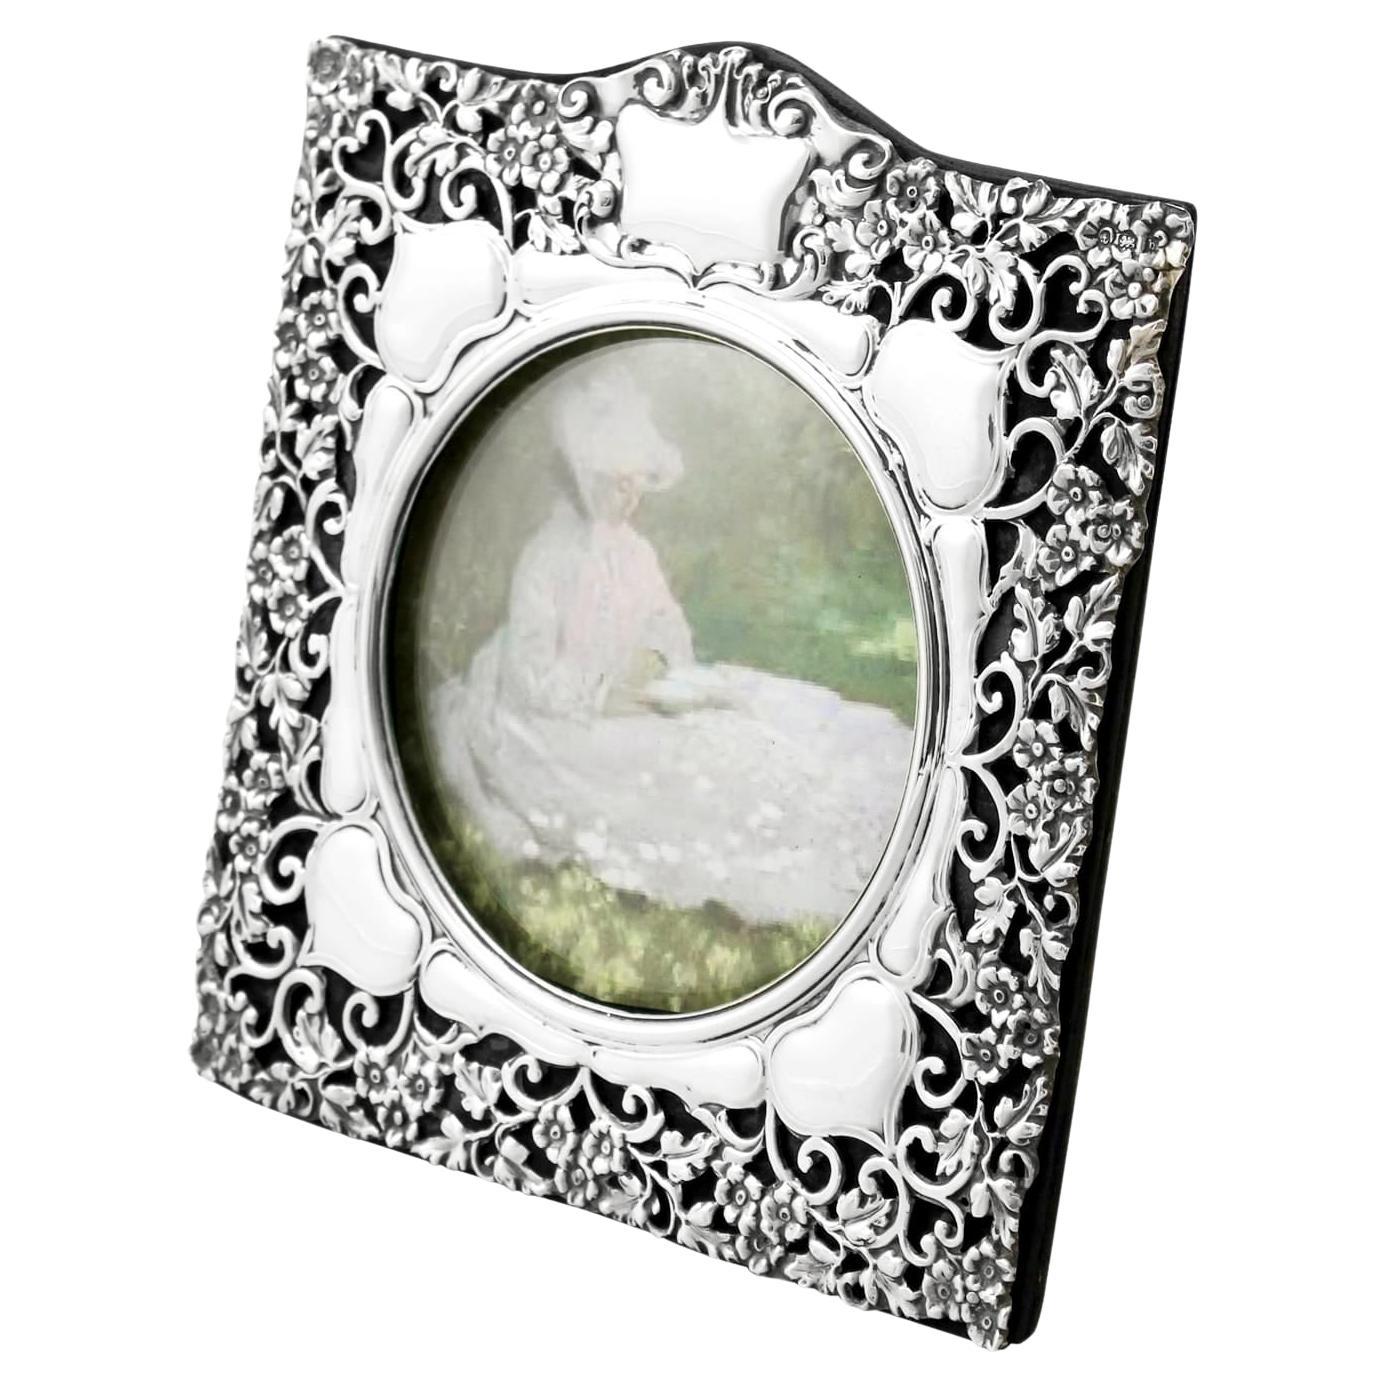 Synyer & Beddoes Antique Edwardian Sterling Silver Photograph Frame